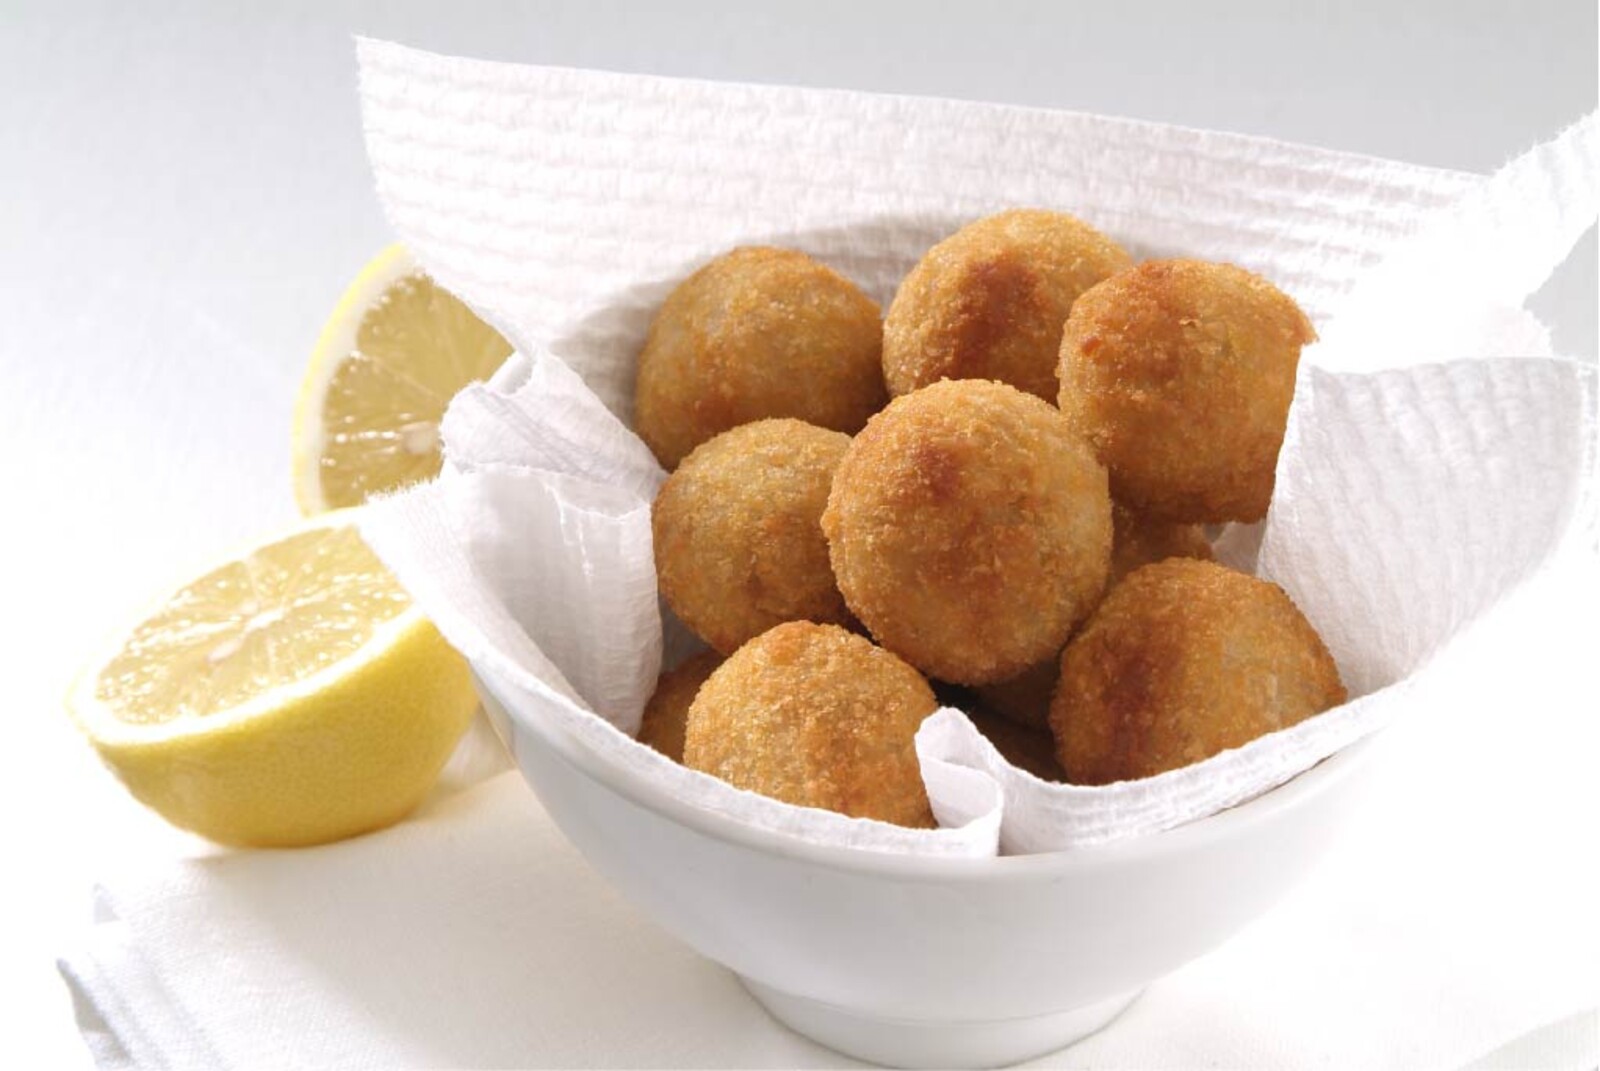 Cavos Products Chicken Cocktail Bites - Kiev Style